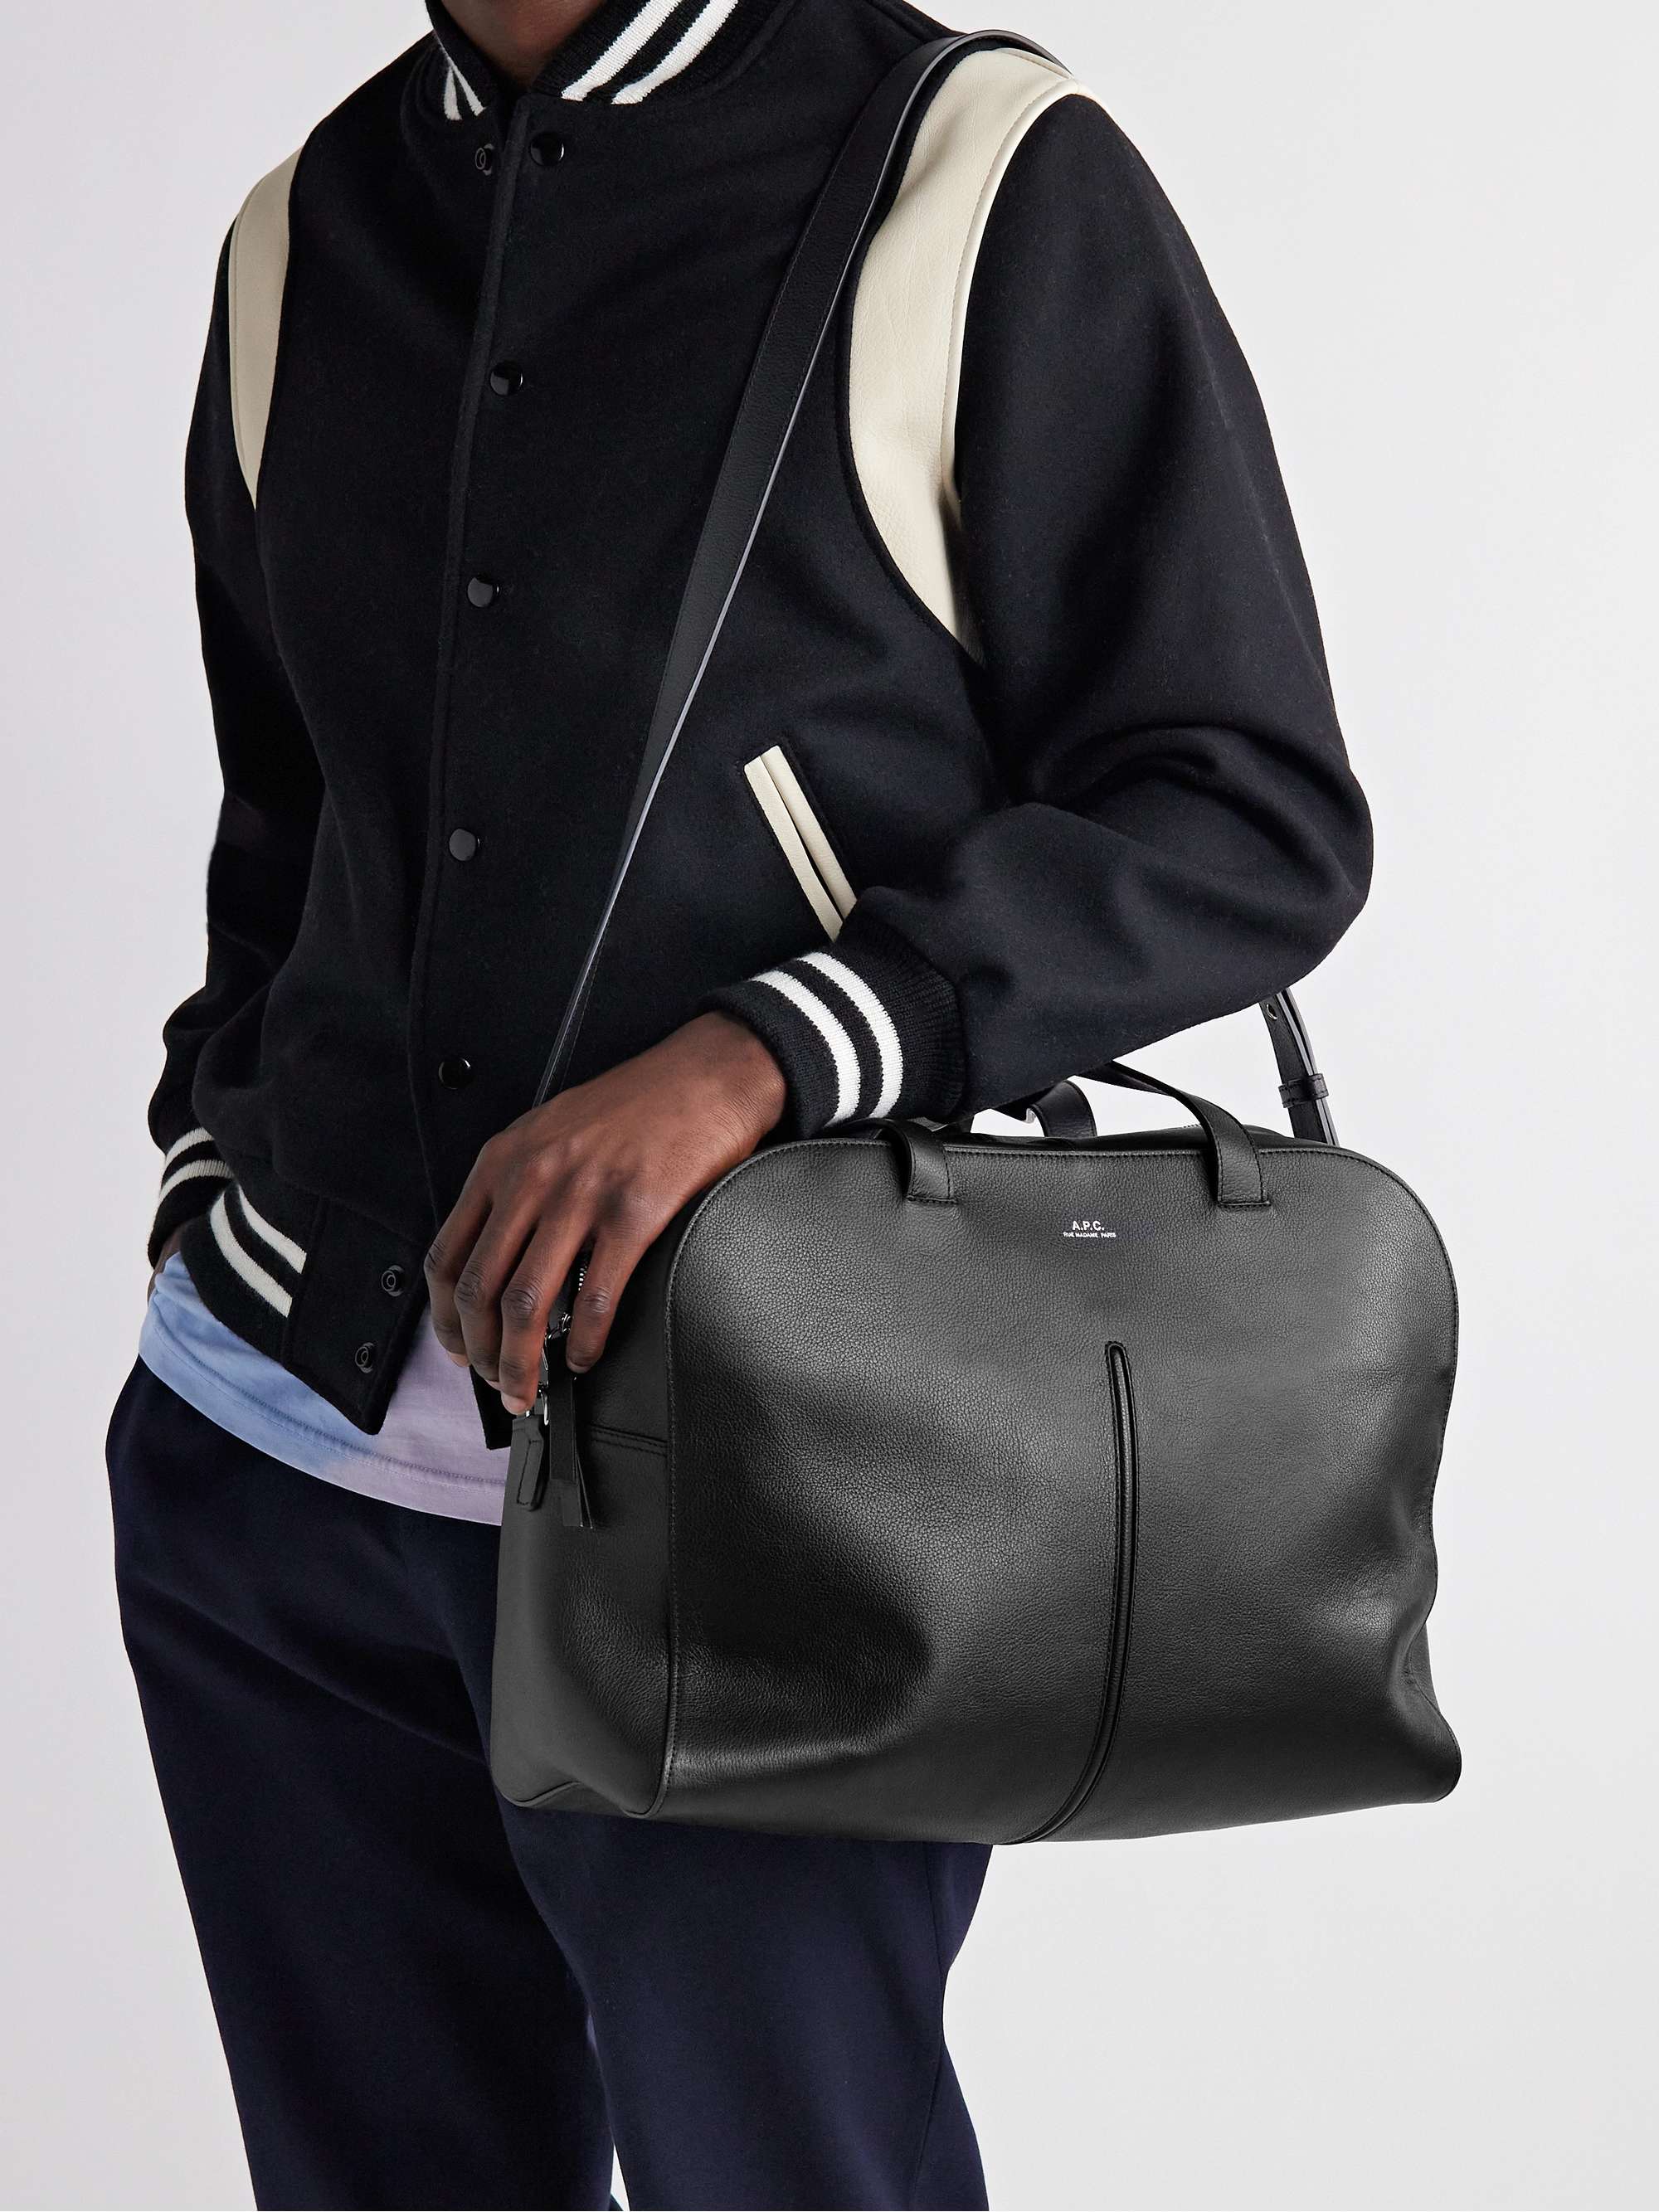 A.P.C. Full-Grain Leather Weekend Bag